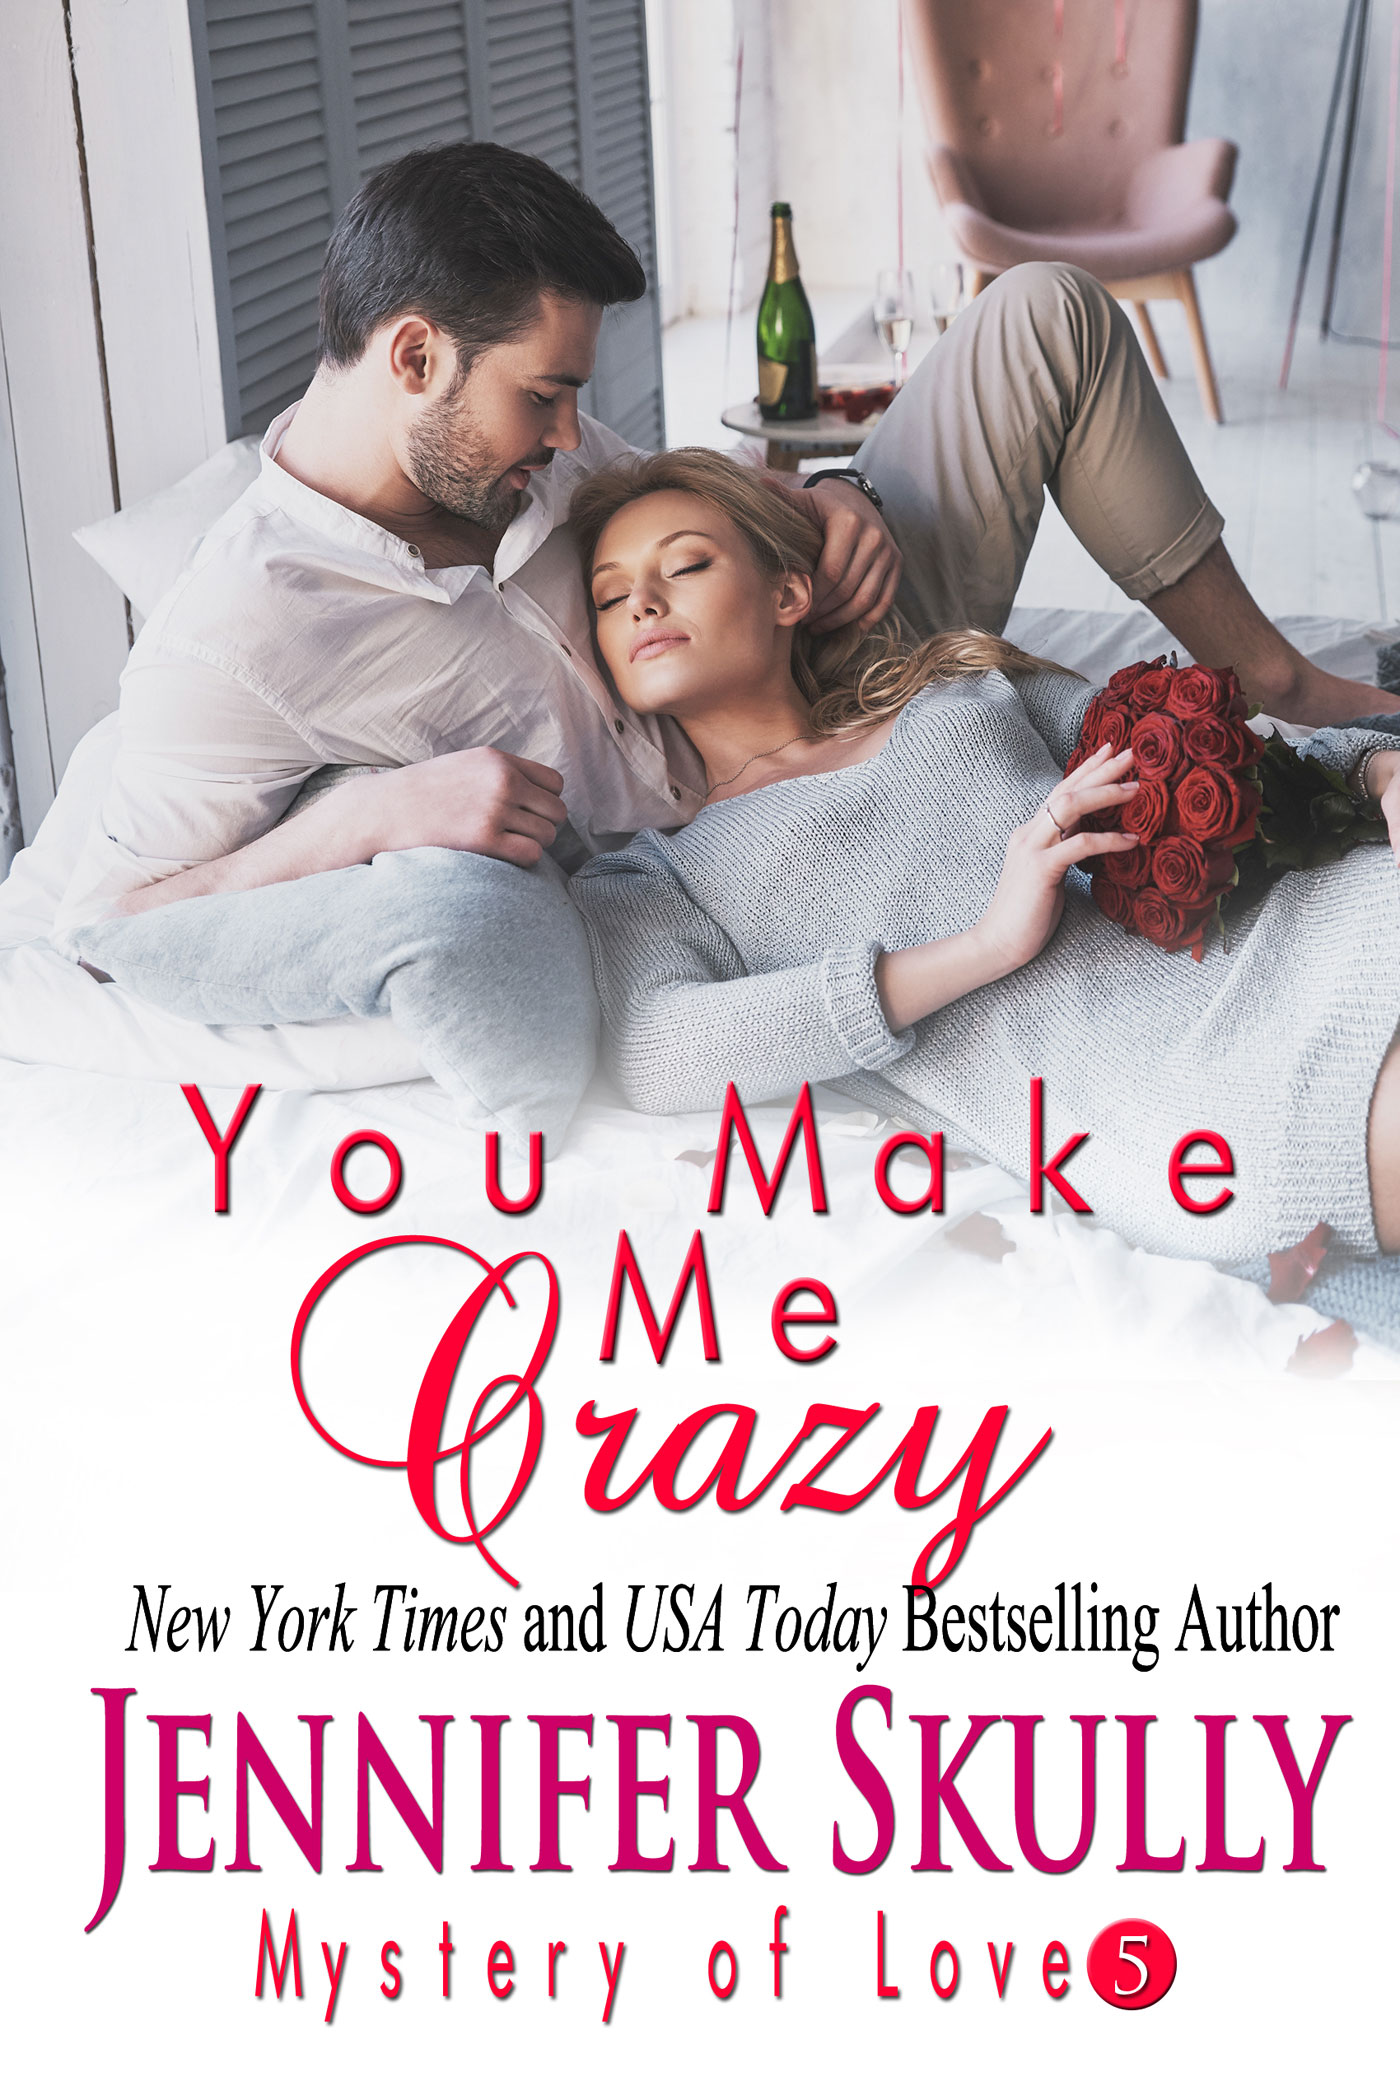 Cover of You Make Me Crazy by New York Times and USA Today Bestselling Author Jennifer Skully - Mystery of Love 5